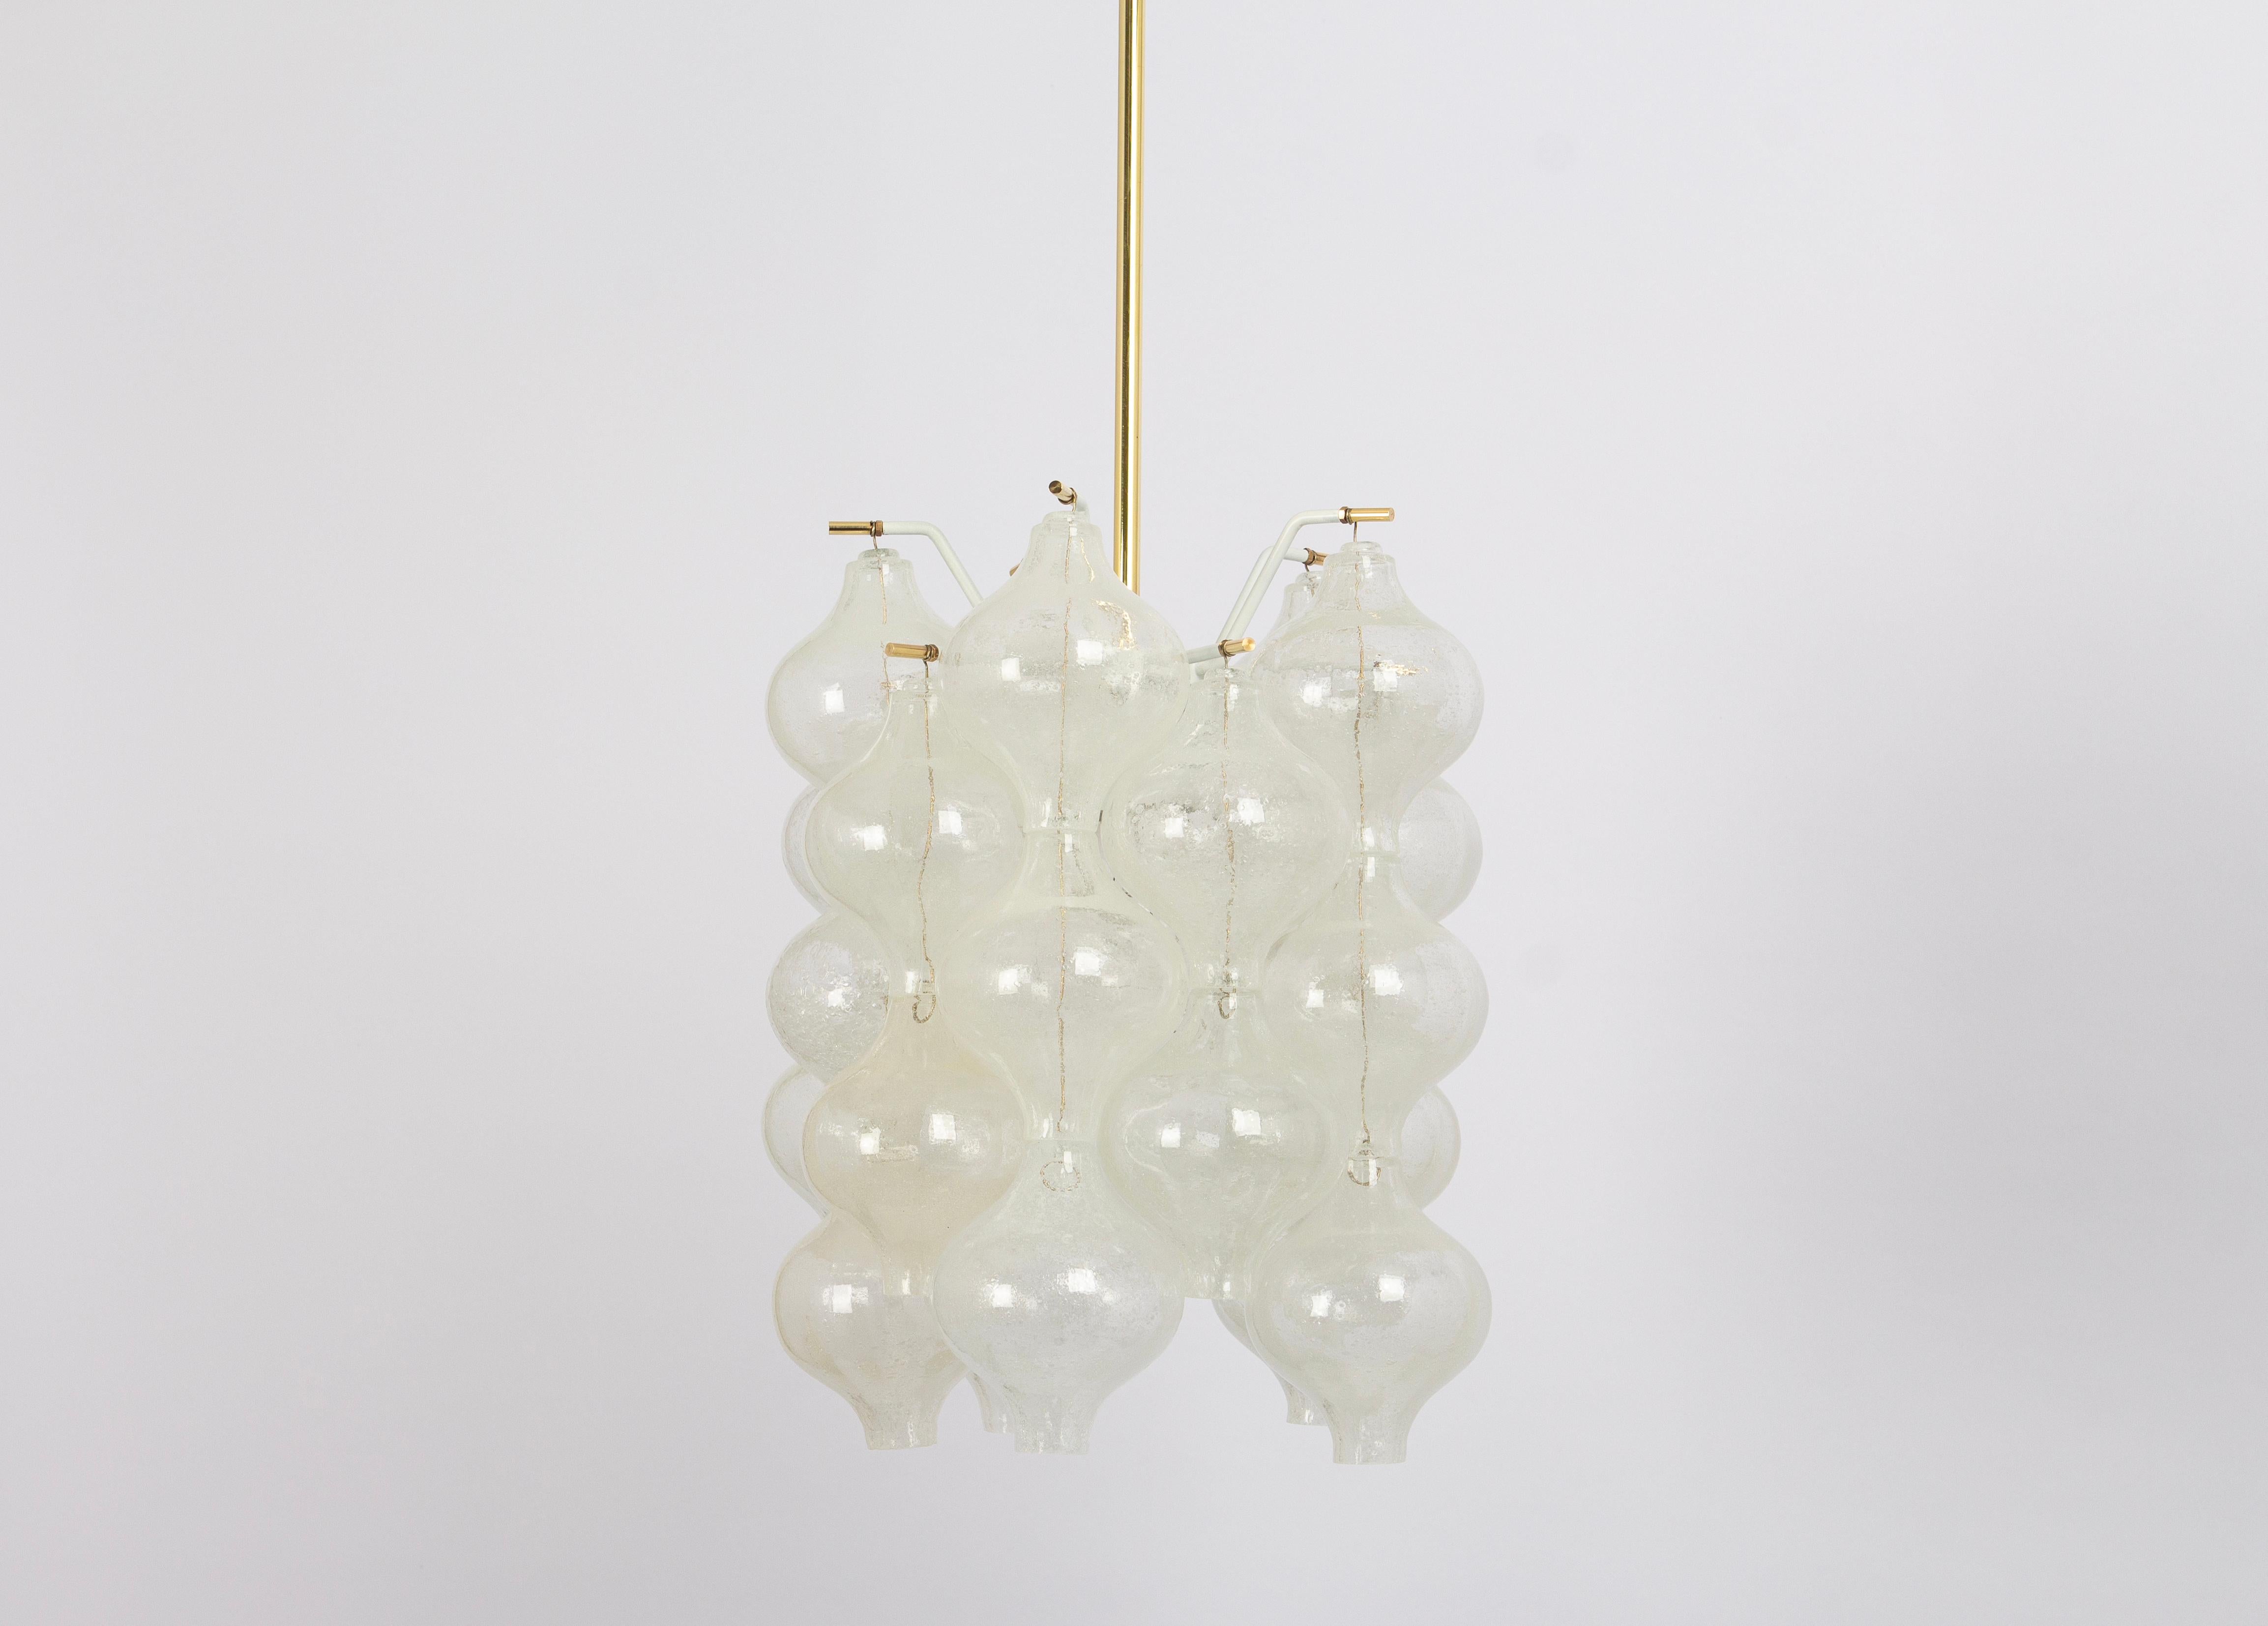 Wonderful onion-shaped -Tulipan glass Pendant light. Several hand-blown glasses are suspended on a white-painted metal frame and brass center rod.
Best of design from the 1960s by Kalmar, Austria. High-quality materials.

Measures: Sockets: 1 x E27